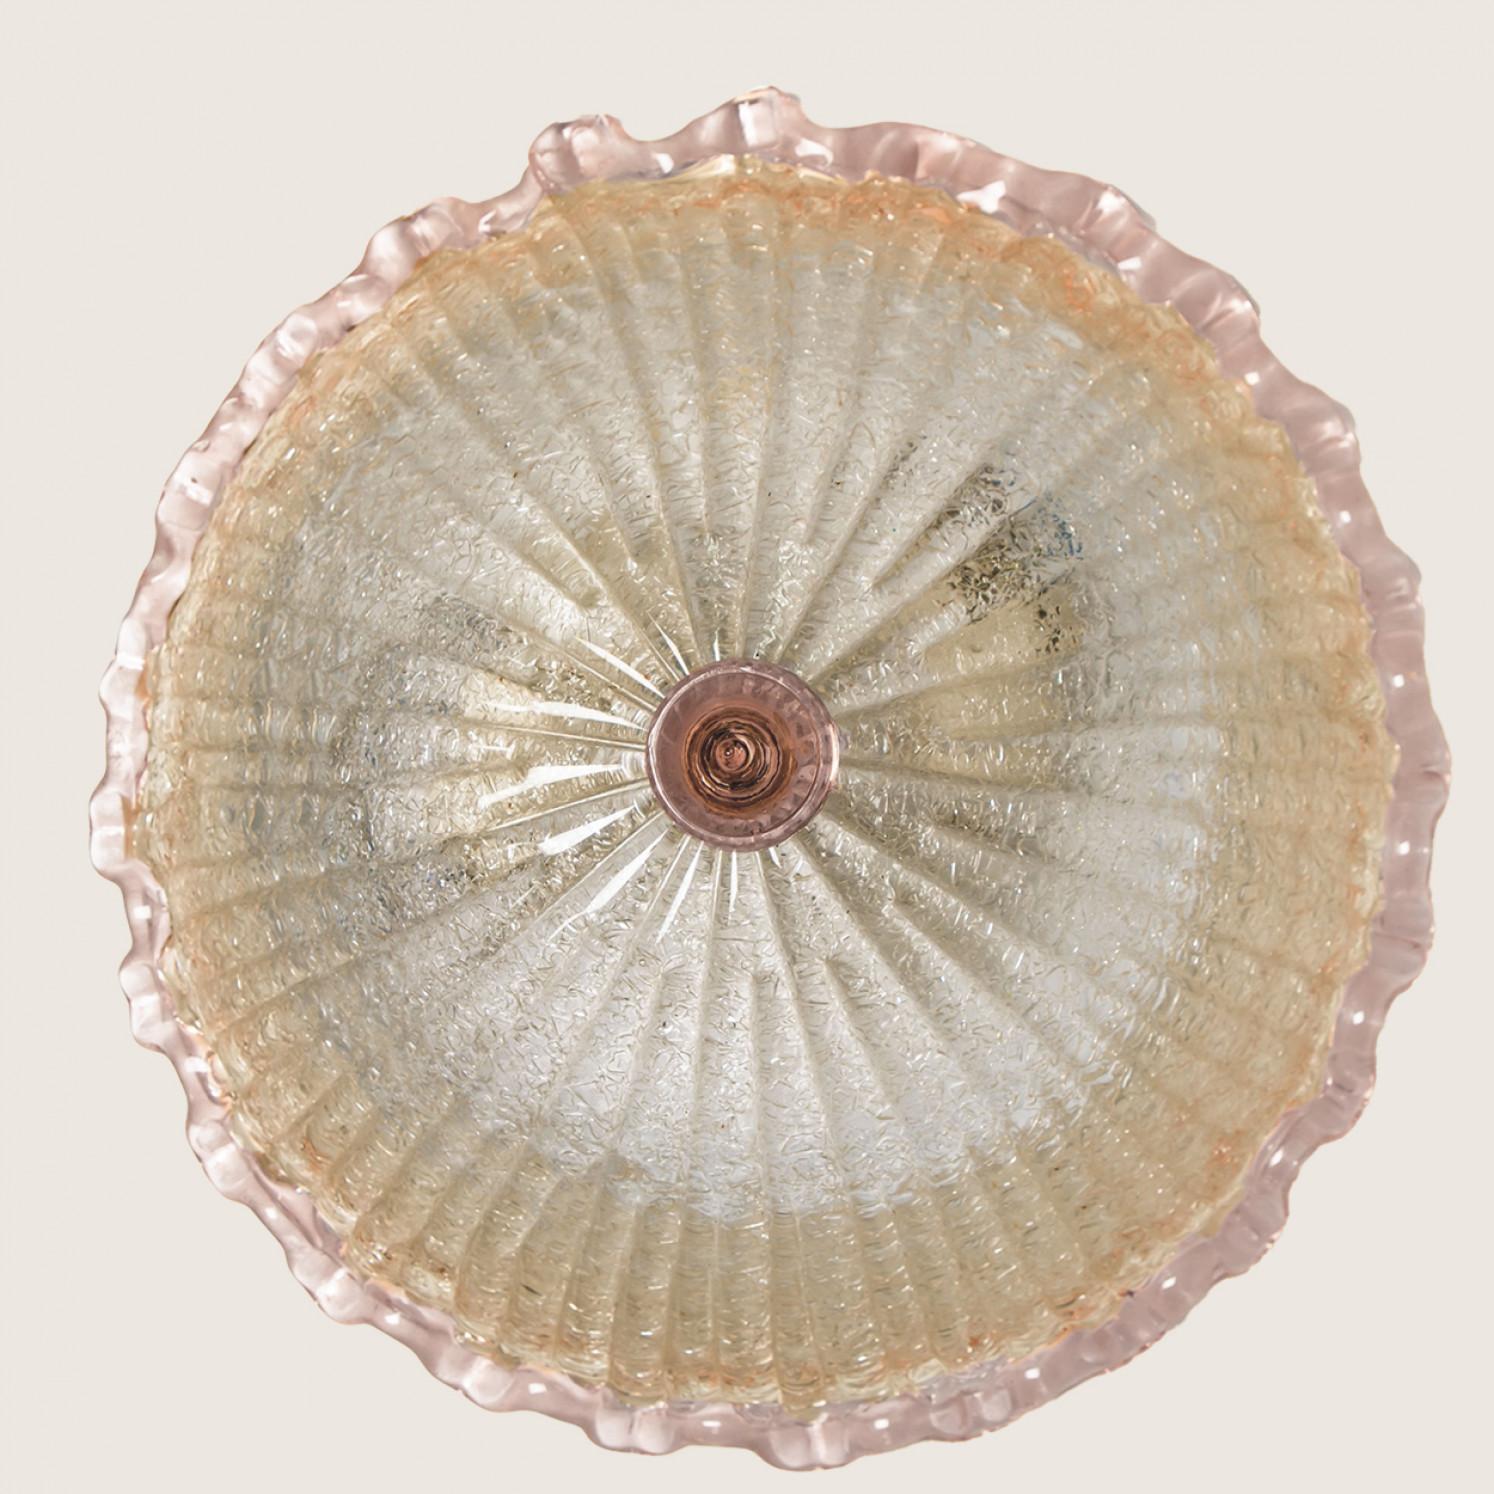 An elegant hand blown Murano glass flush mount in the style of Barovier & Toso. Mounted on a white frame. With pink and clear colored glass. The textured glass refract light beautifully. The flush mount fills the room with a soft, warm and welcoming